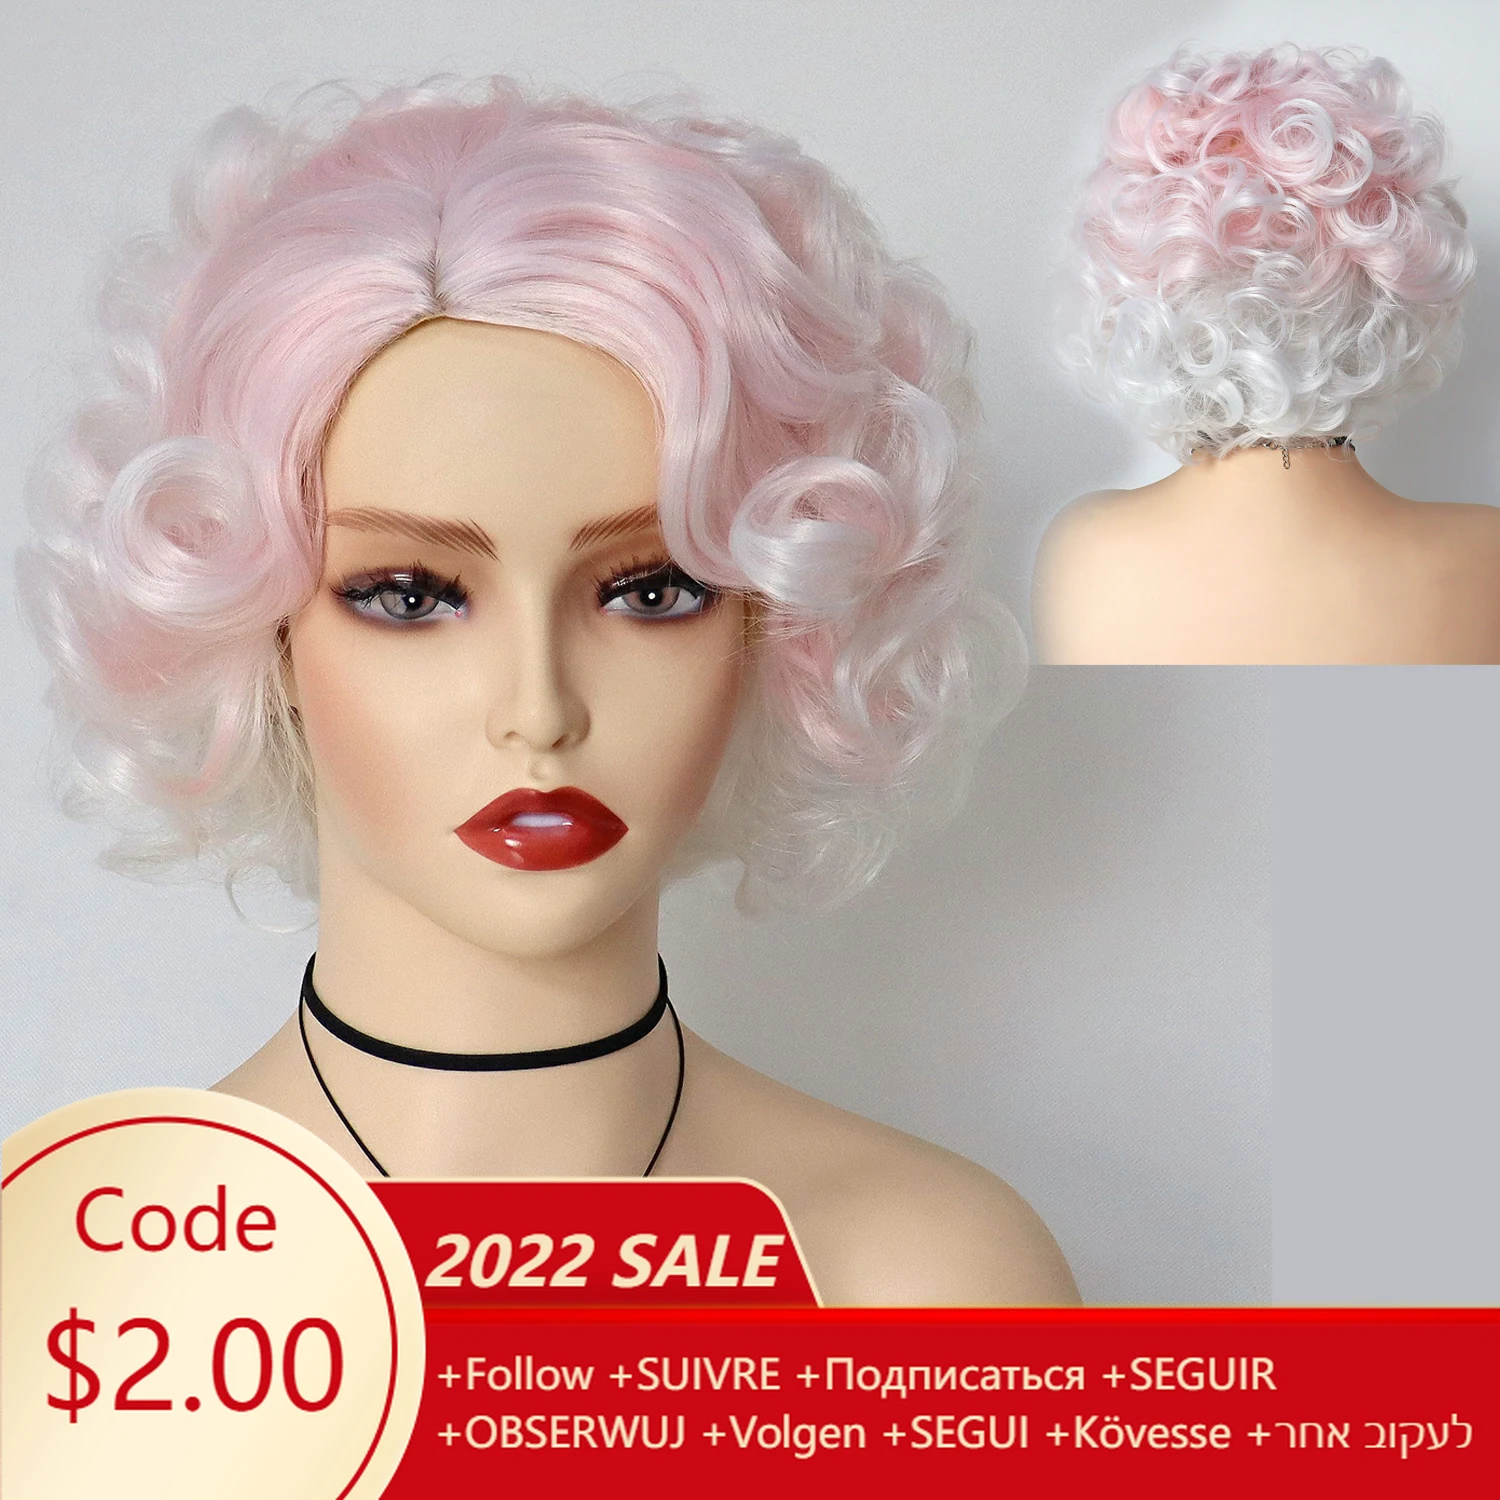 

GNIMEGIL Synthetic Short Curly Wig Ombre Light Pink Waving Hair Cosplay Wig for Pretty Girl Fluffy Costume Party Wigs Purple Wig